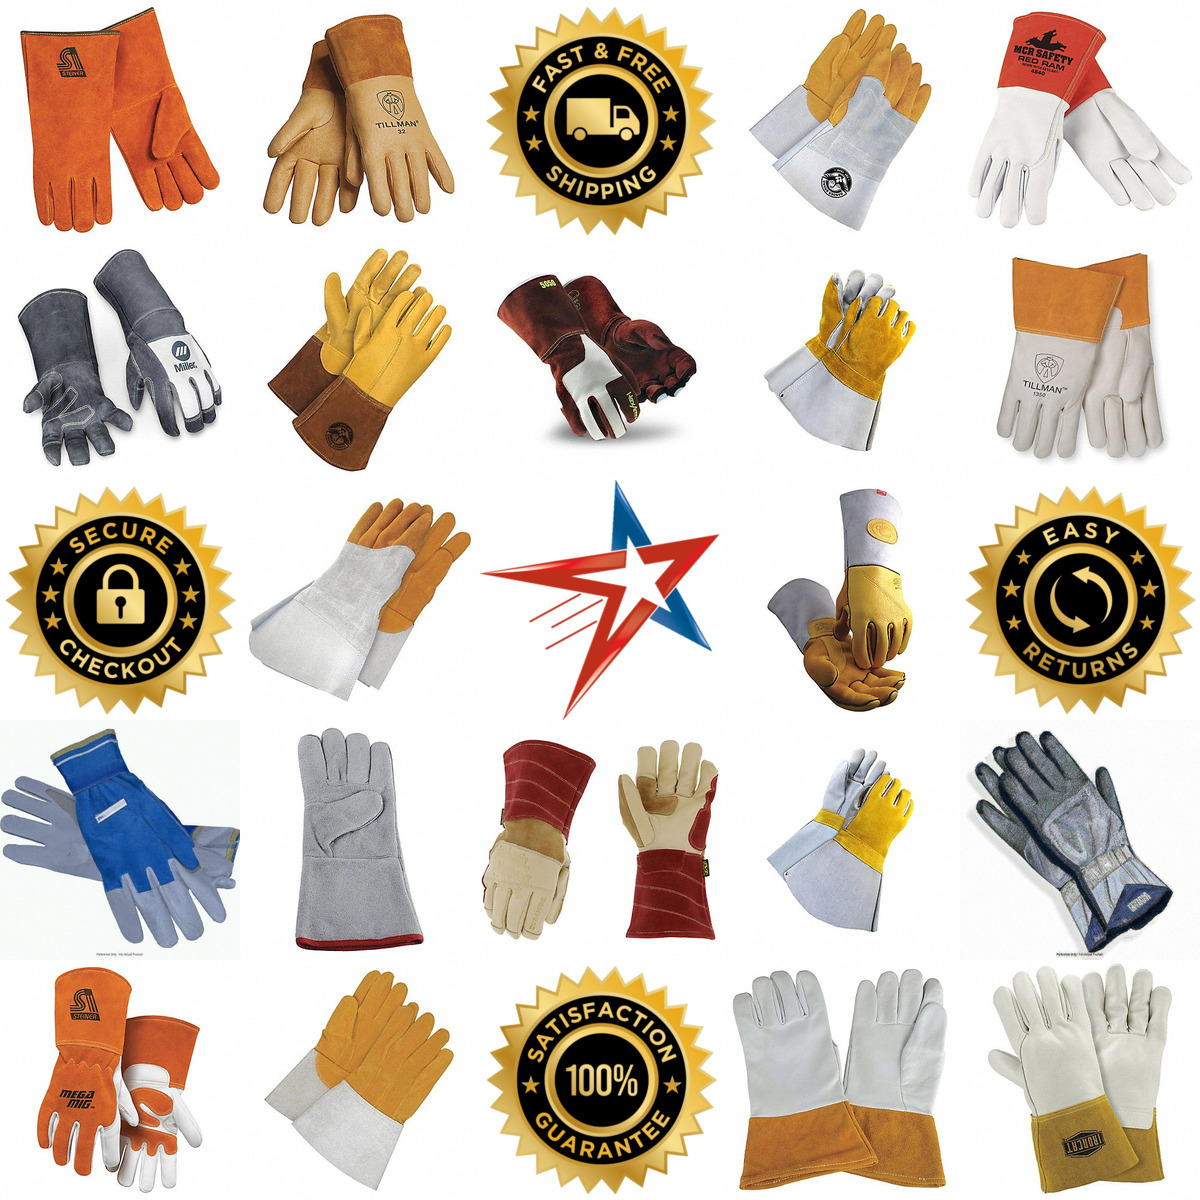 A selection of Welding Gloves products on GoVets